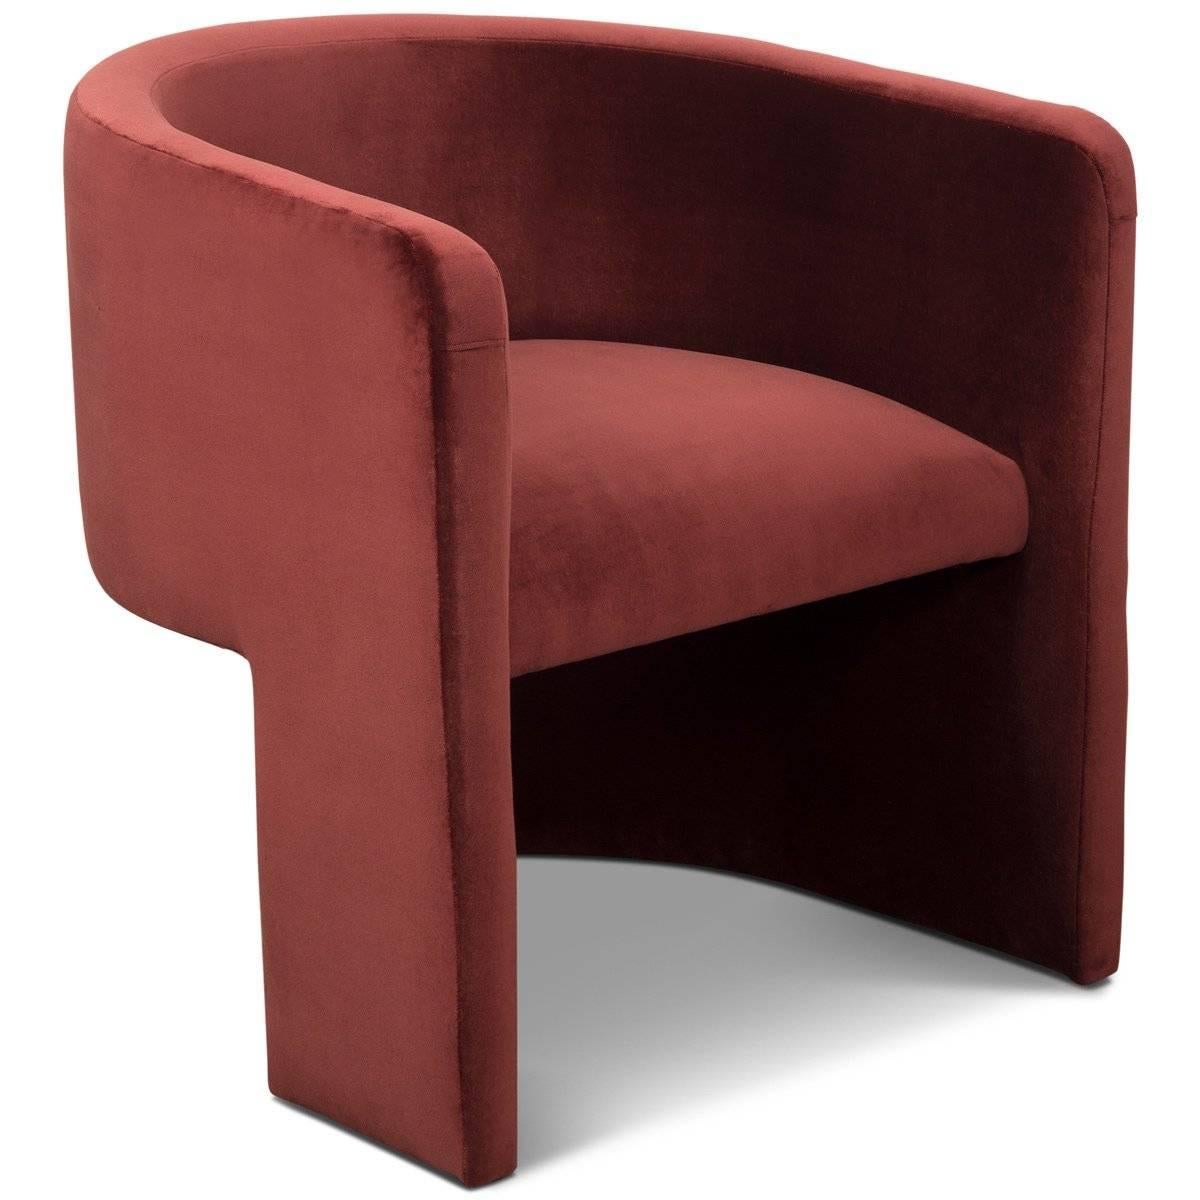 Like its namesake island in the Caribbean, the Martinique occasional chair in velvet is beautiful, refreshing, and unforgettable. Smooth curves are punctuated by a striking section of negative space making the Martinique occasional chair appear